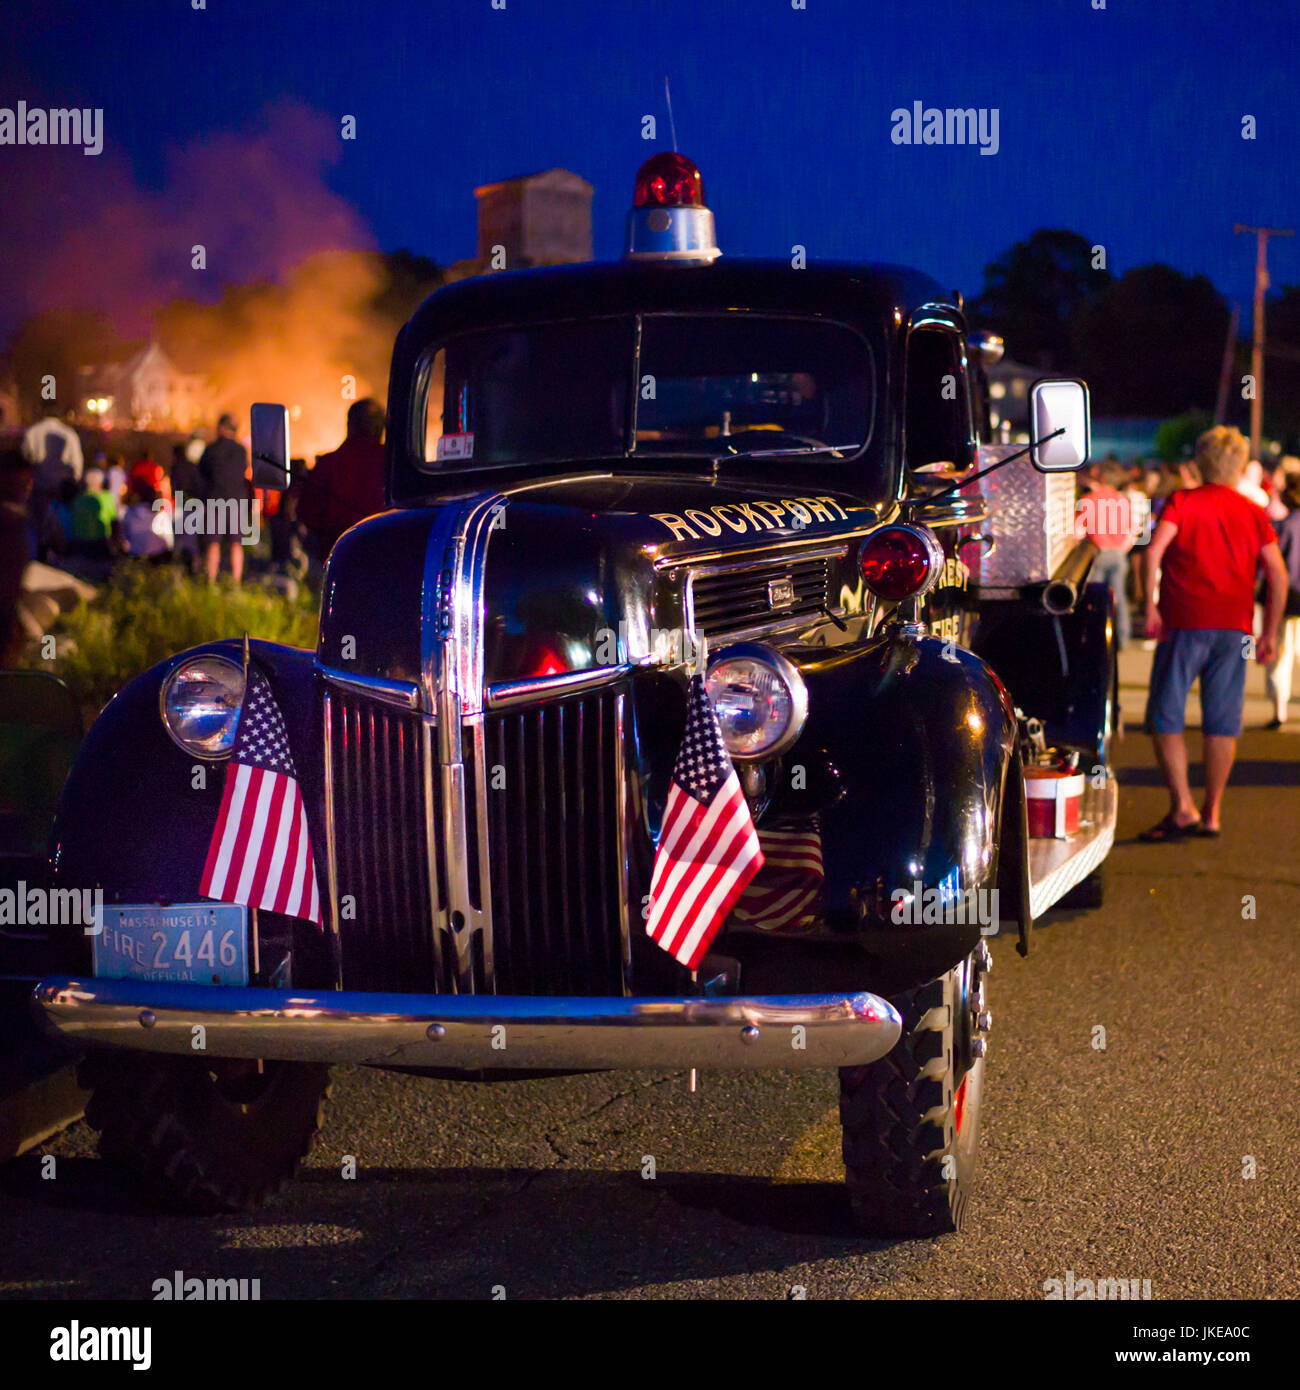 USA, Massachusetts, Cape Ann, Rockport, Fourth of July, Independence Day Bonfire, old fire truck Stock Photo